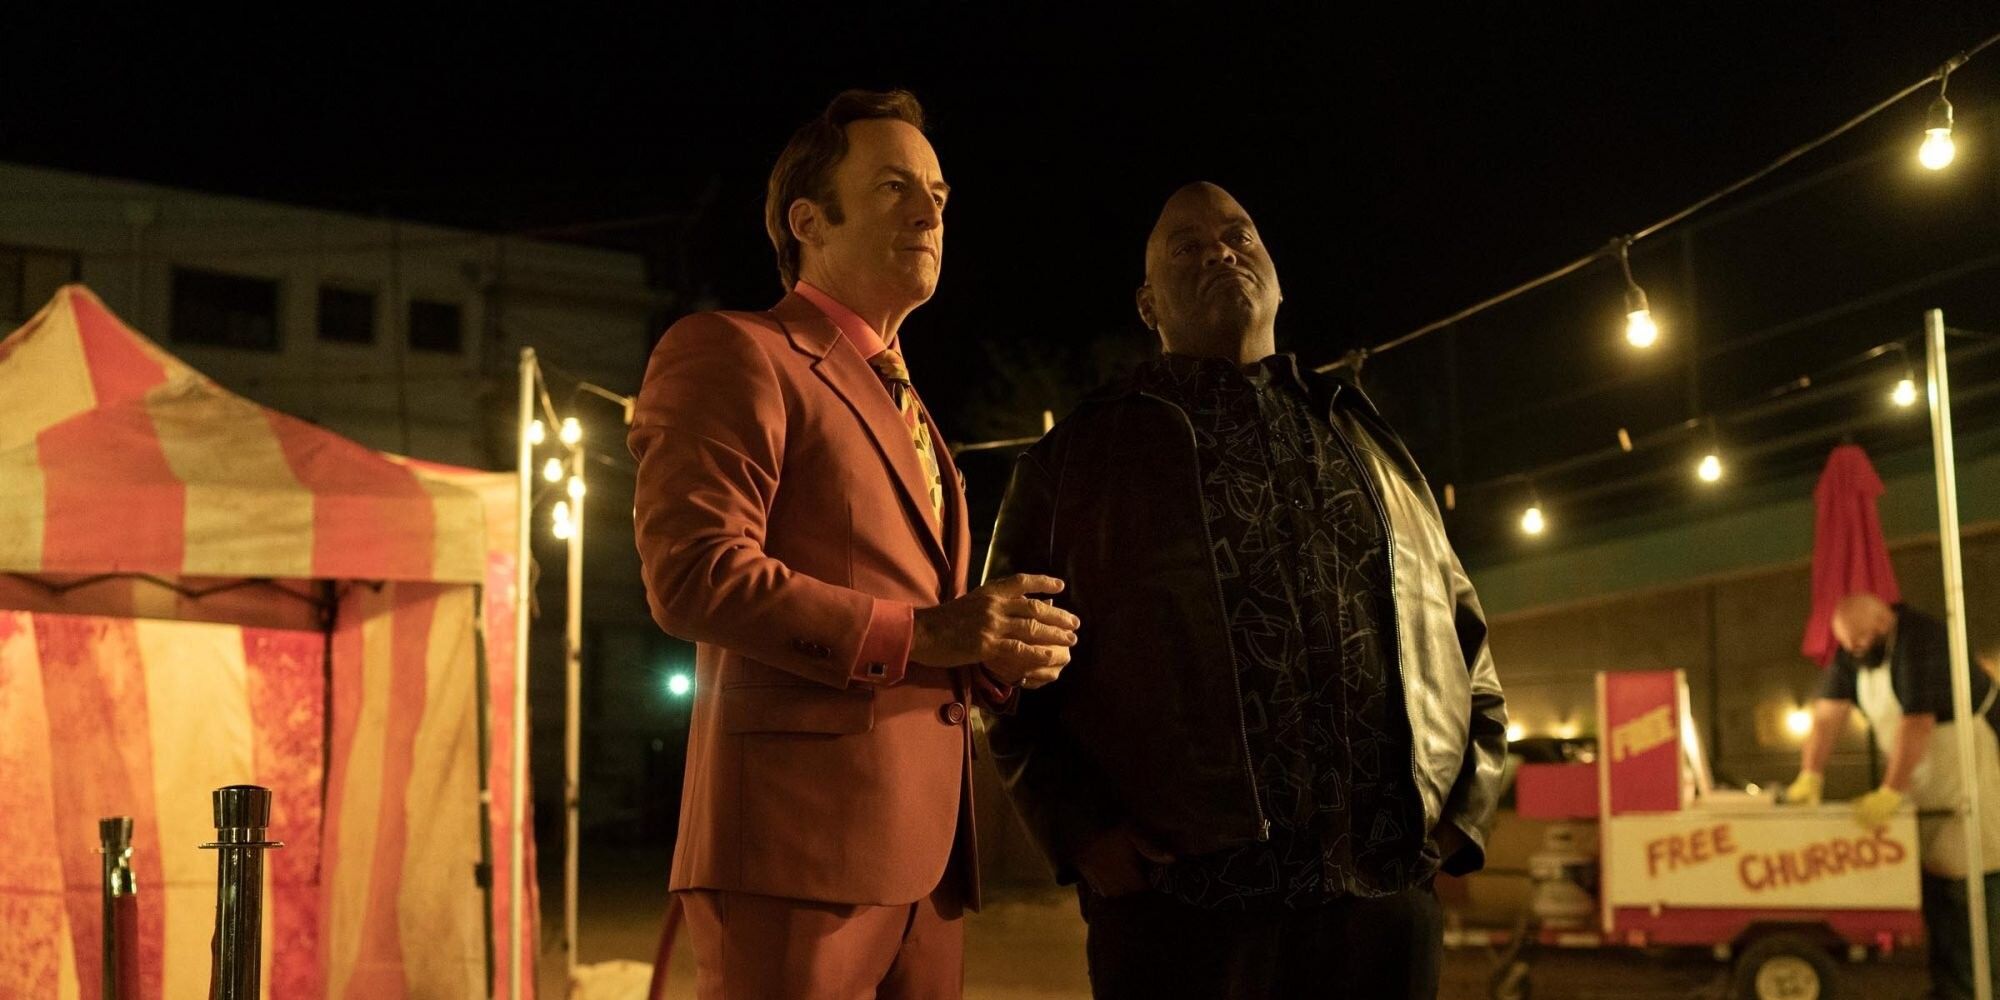 Bob Odenkirk as Jimmy McGill Saul and Lavell Crawford as Huell in Better Call Saul